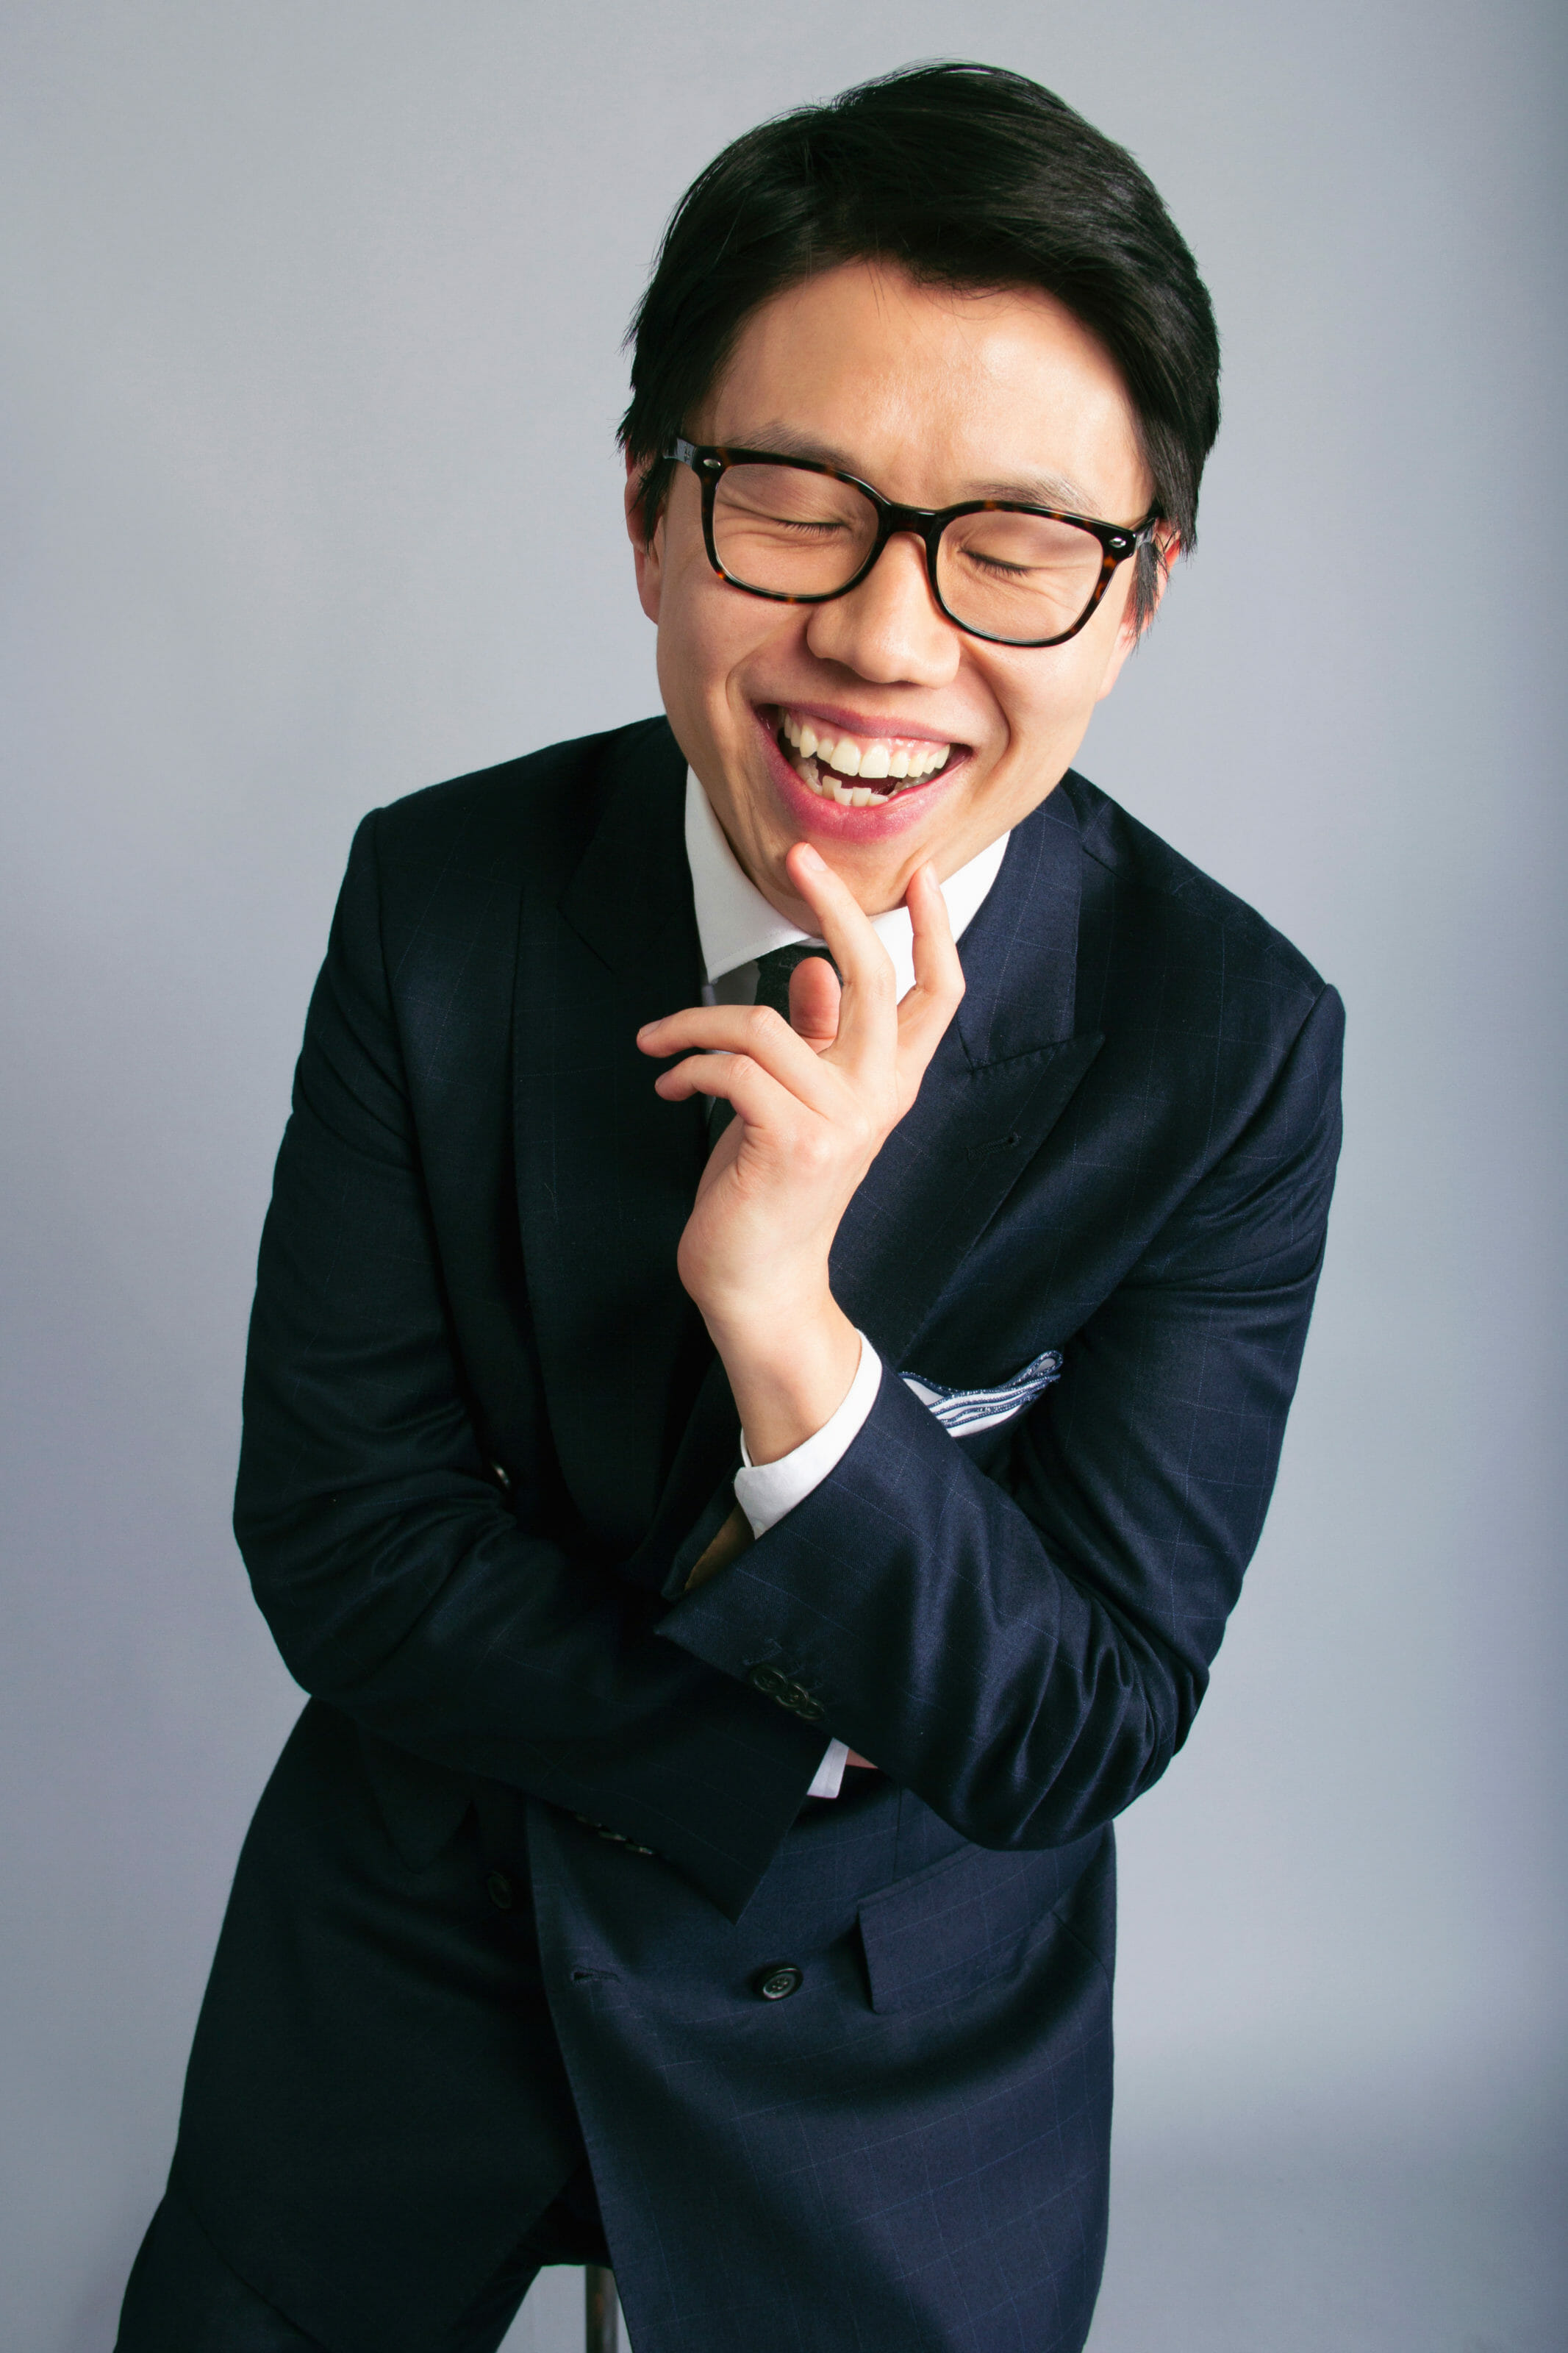 Fan Bi laughing, against a grey background wearing glasses and a well-tailored suit jacket.